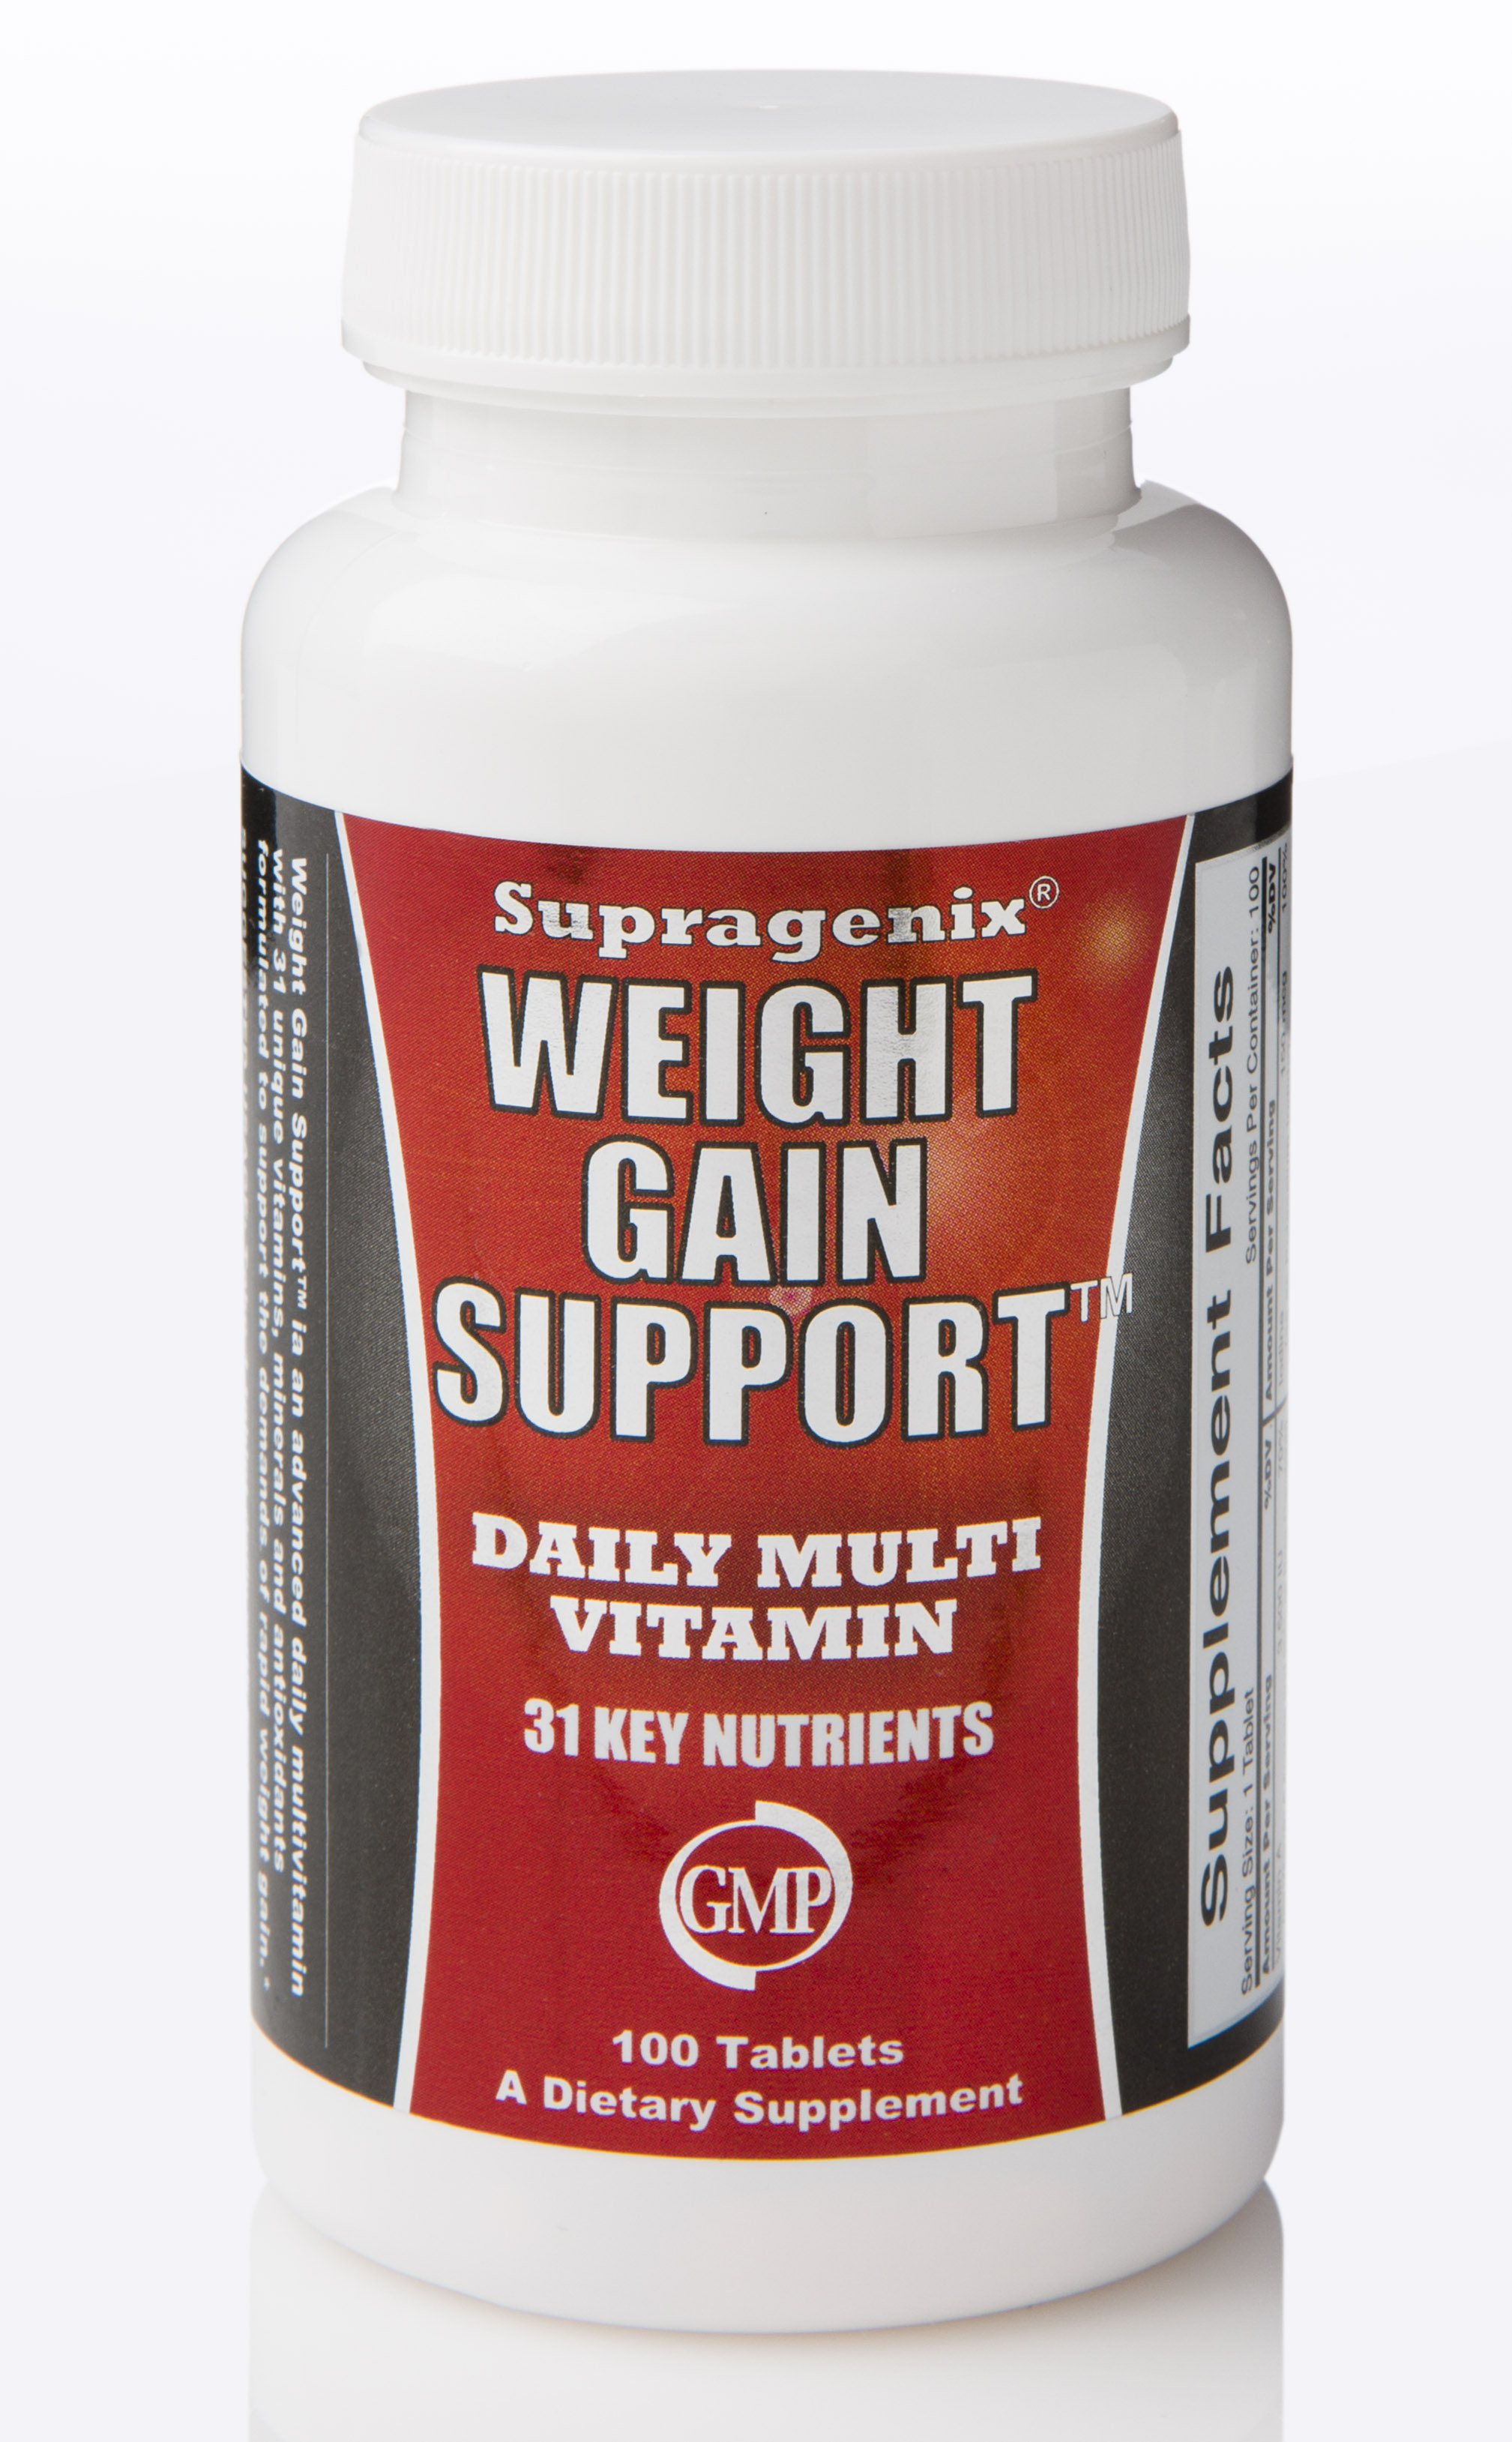 CB-1 Weight Gainer Adds New Weight Gain Support Multivitamin to their